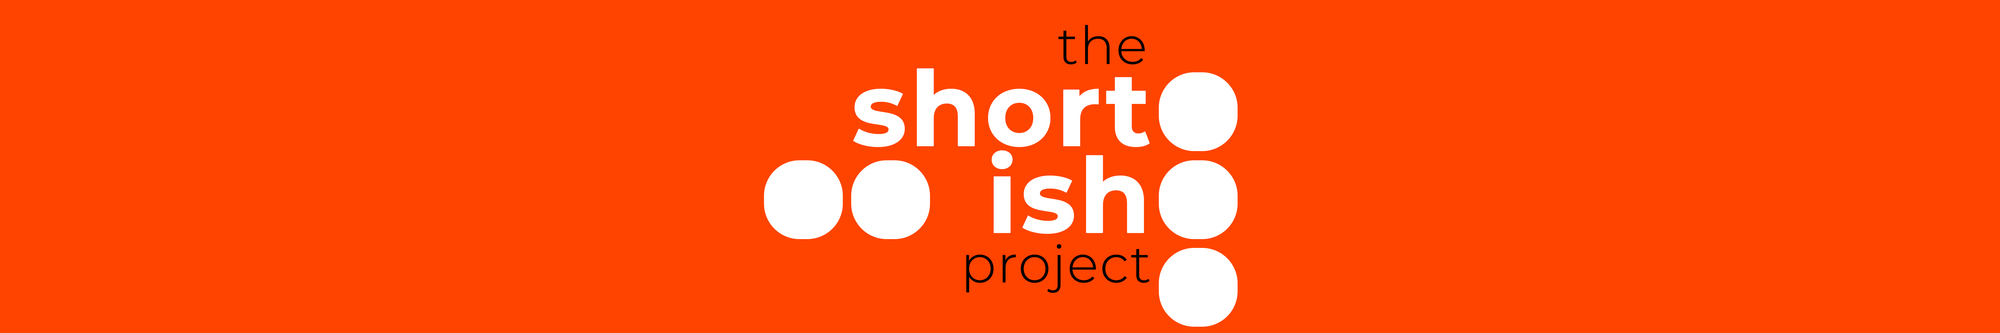 short novels published by The Shortish Project